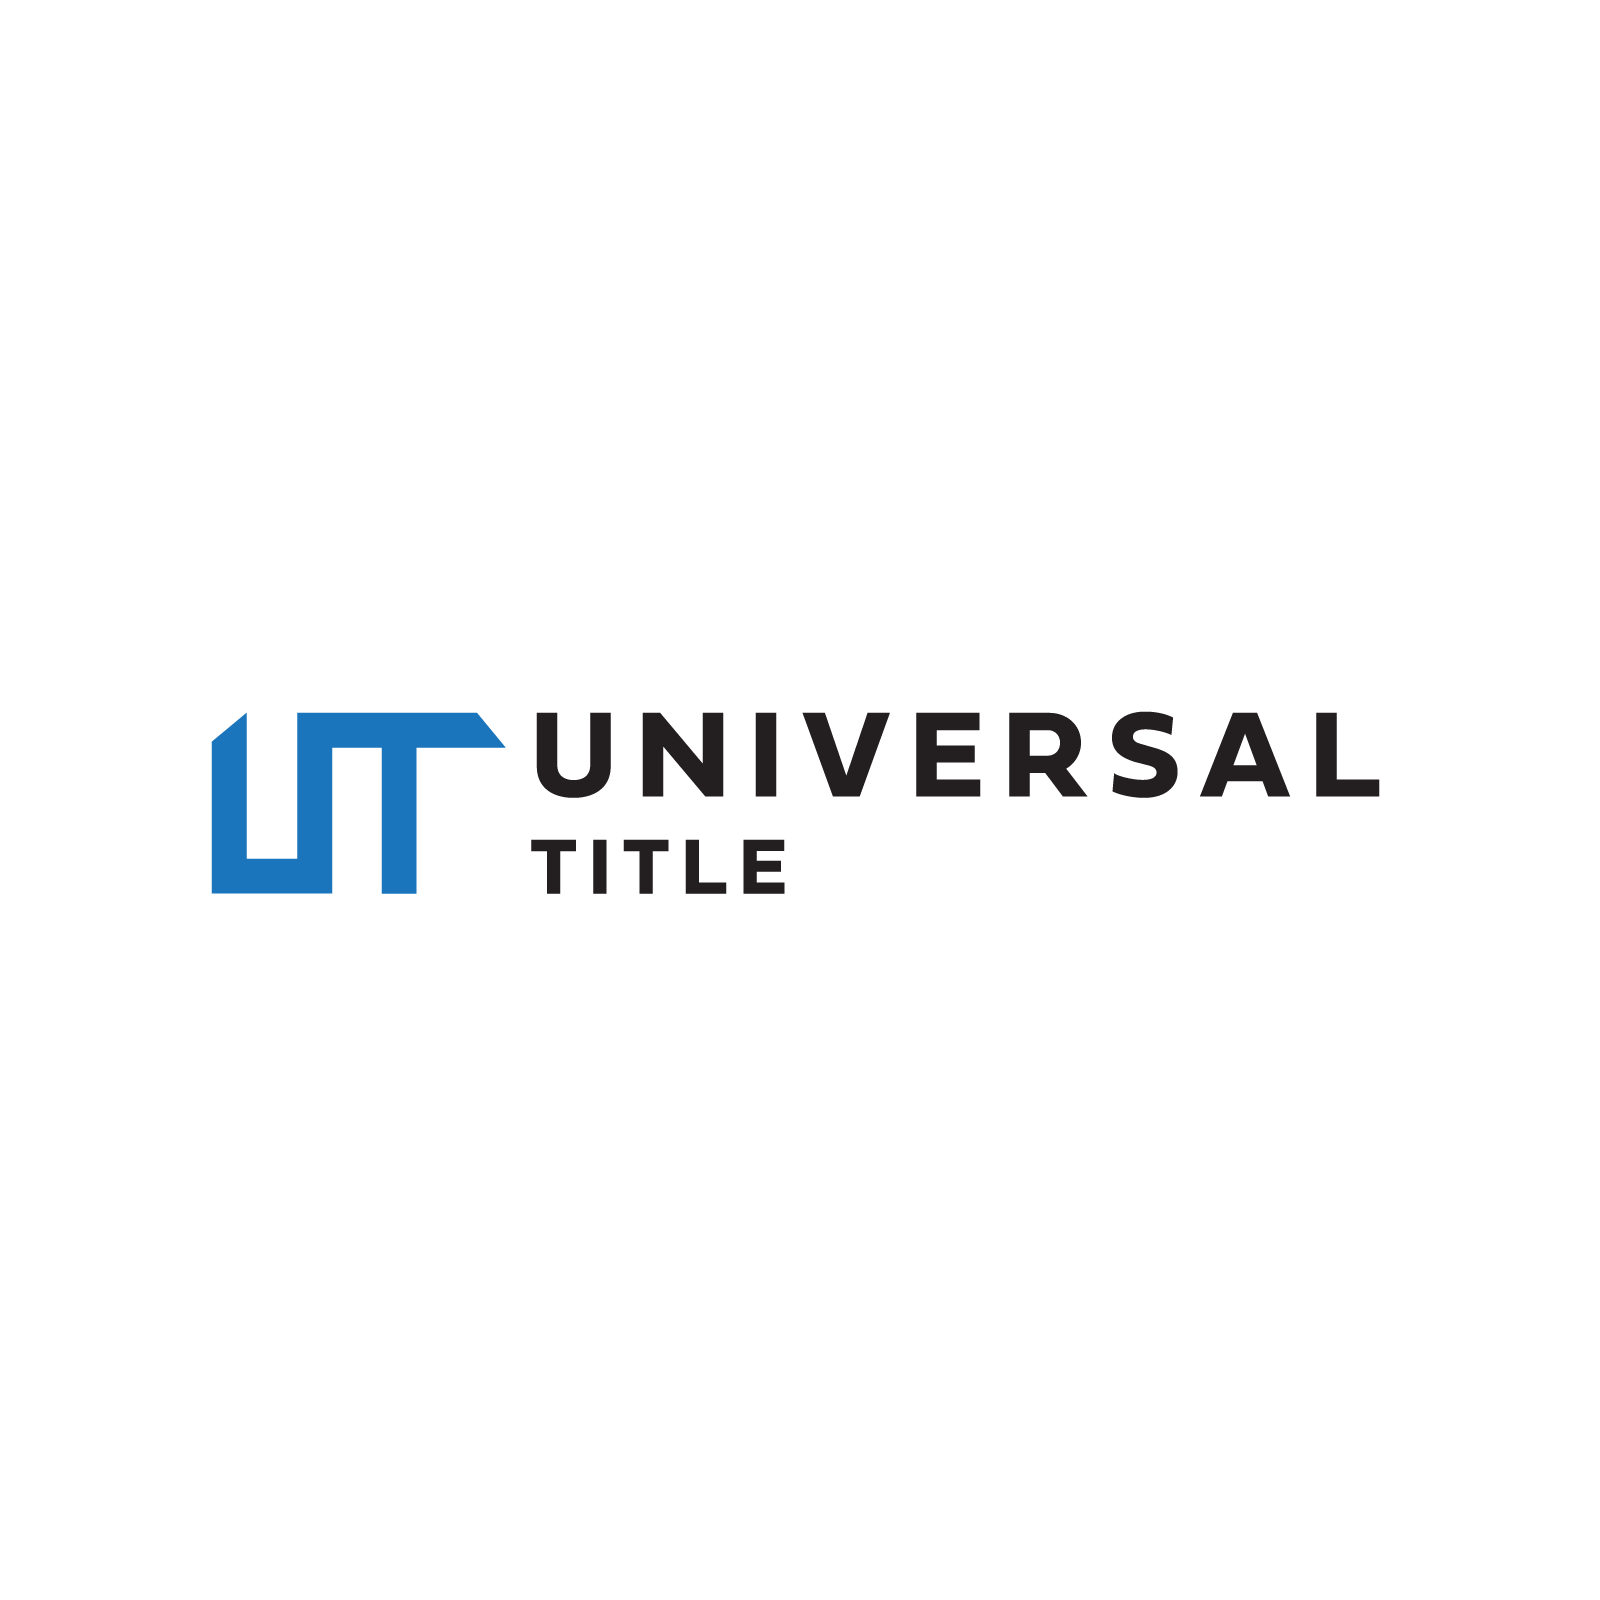 Universal Title: The UT Experience